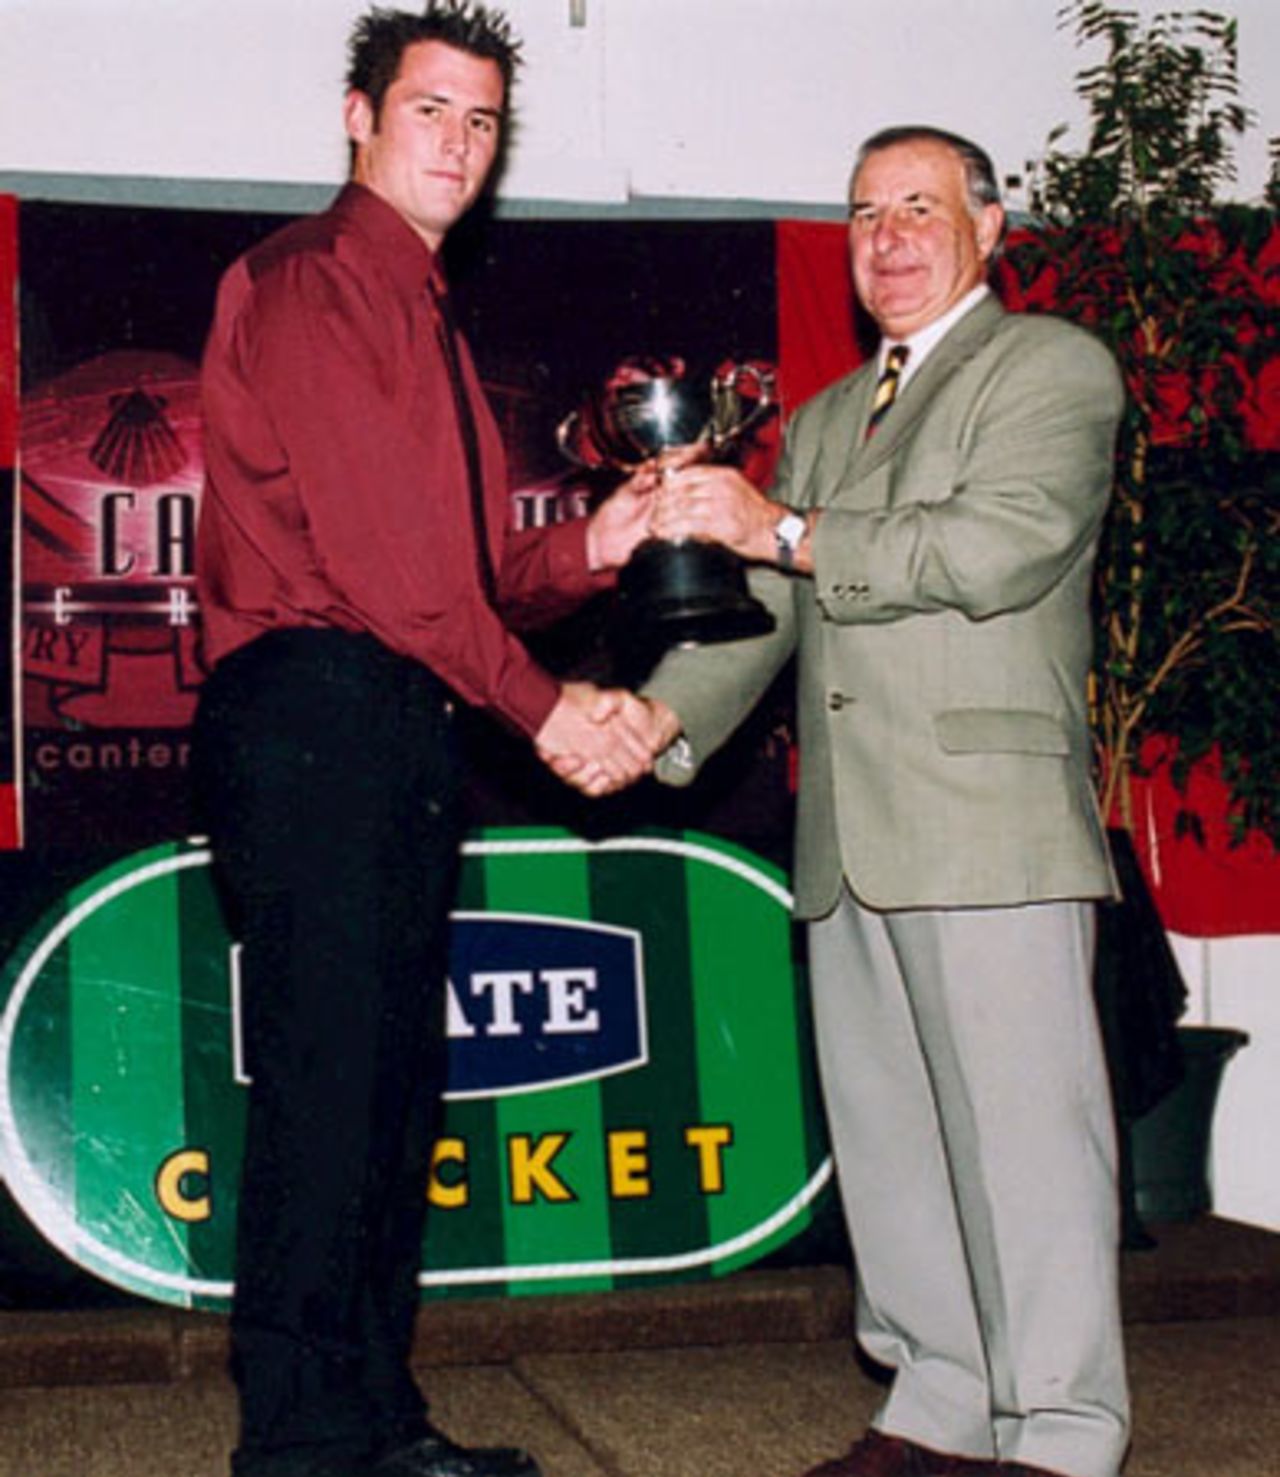 St Albans wicket-keeper Aaron Johnstone (left) receives the Chattel Hayes Memorial Trophy for most wicket-keeping dismissals in men's first grade from Canterbury Cricket Association president Brian Adams. Canterbury Cricket Association Awards 2002/03 at the Canterbury Horticultural Society Hall at Christchurch, 10 April 2003.